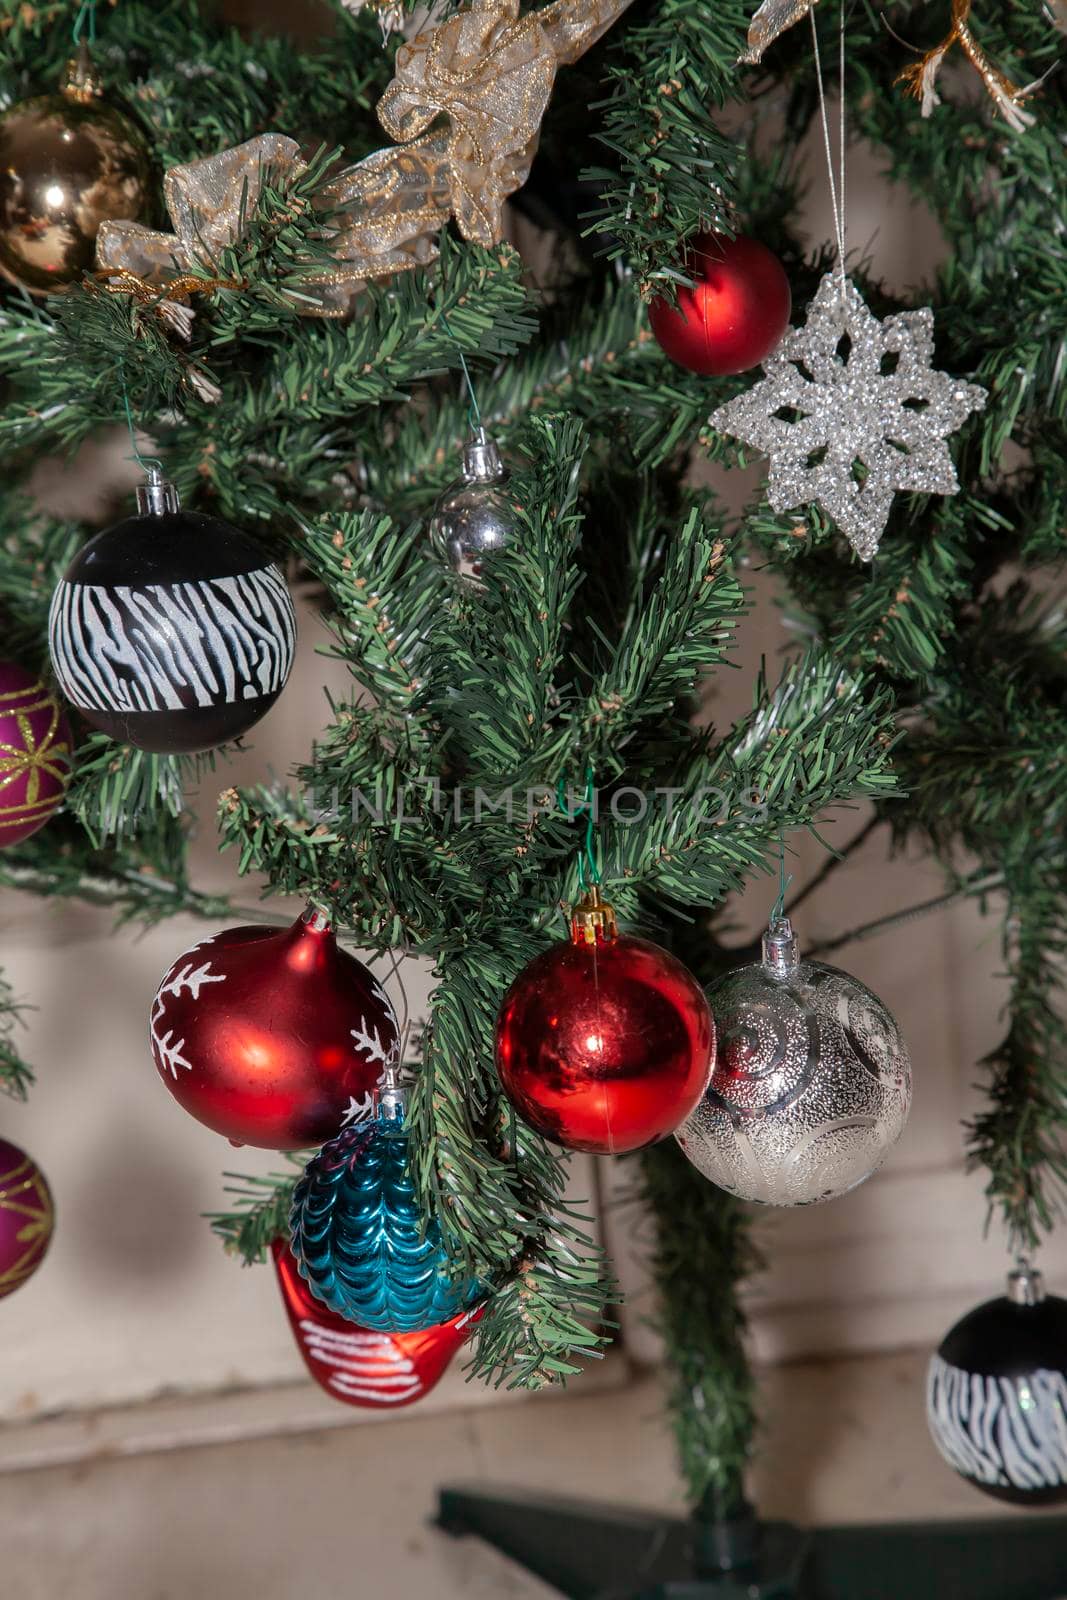 Black, silver, red, purple, and blue globe ornaments next to a red dove, a clear star ornament, and gold and white ribbon on an artificial Christmas tree